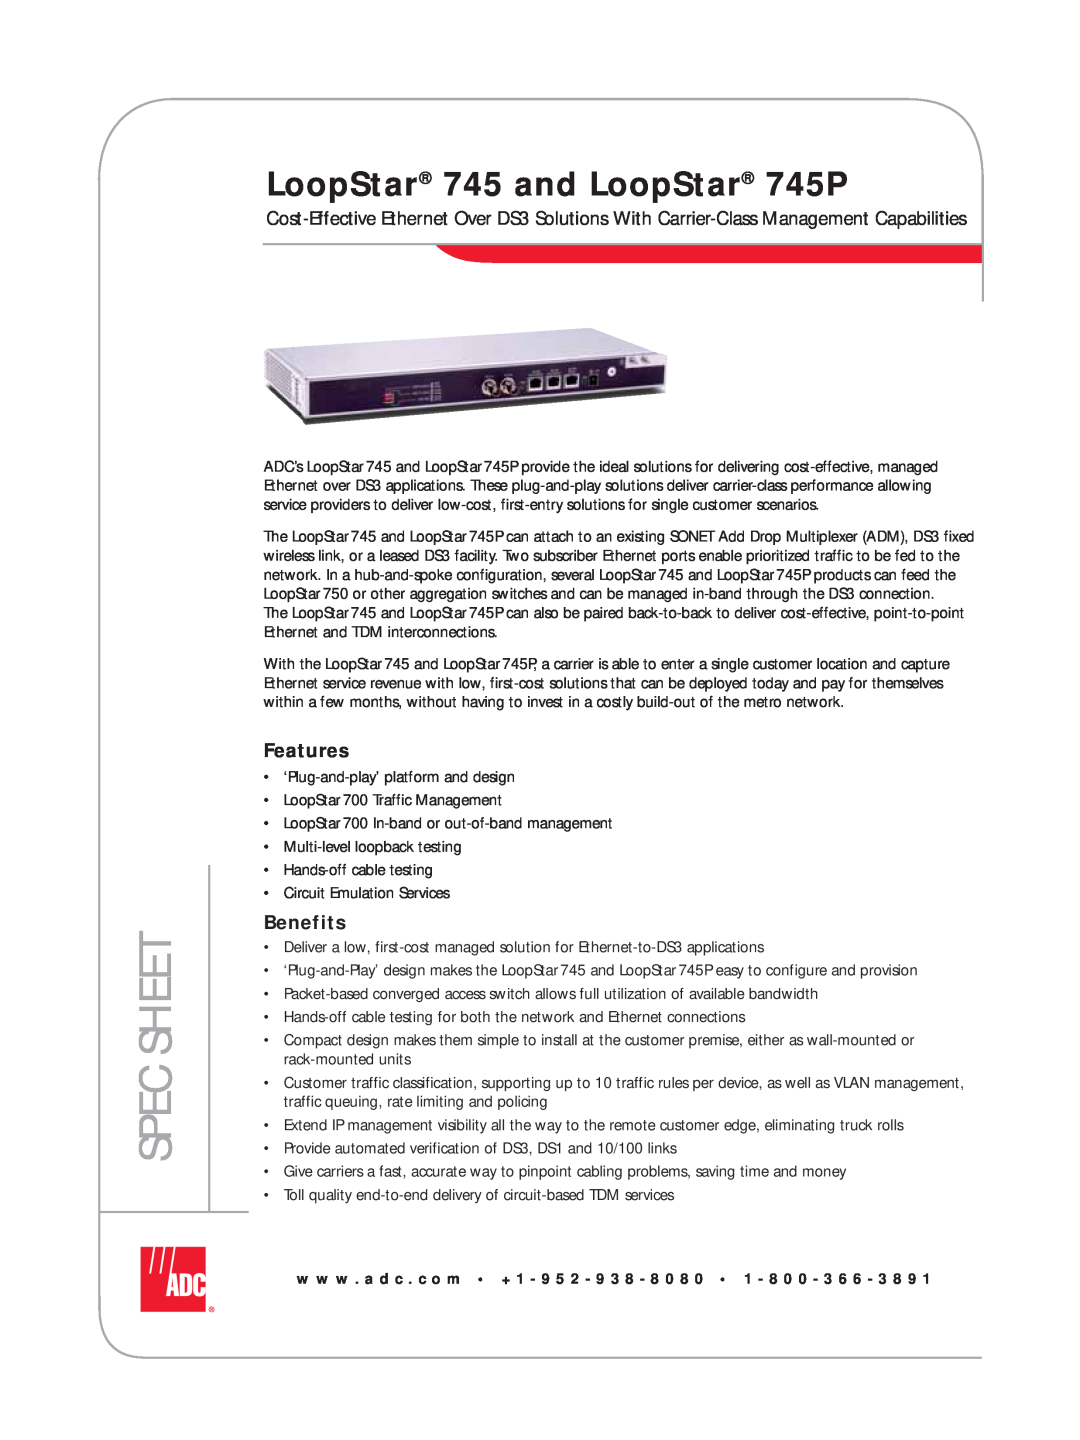 ADC manual LoopStar 745 and LoopStar 745P, Features, Benefits, Spec Sheet 